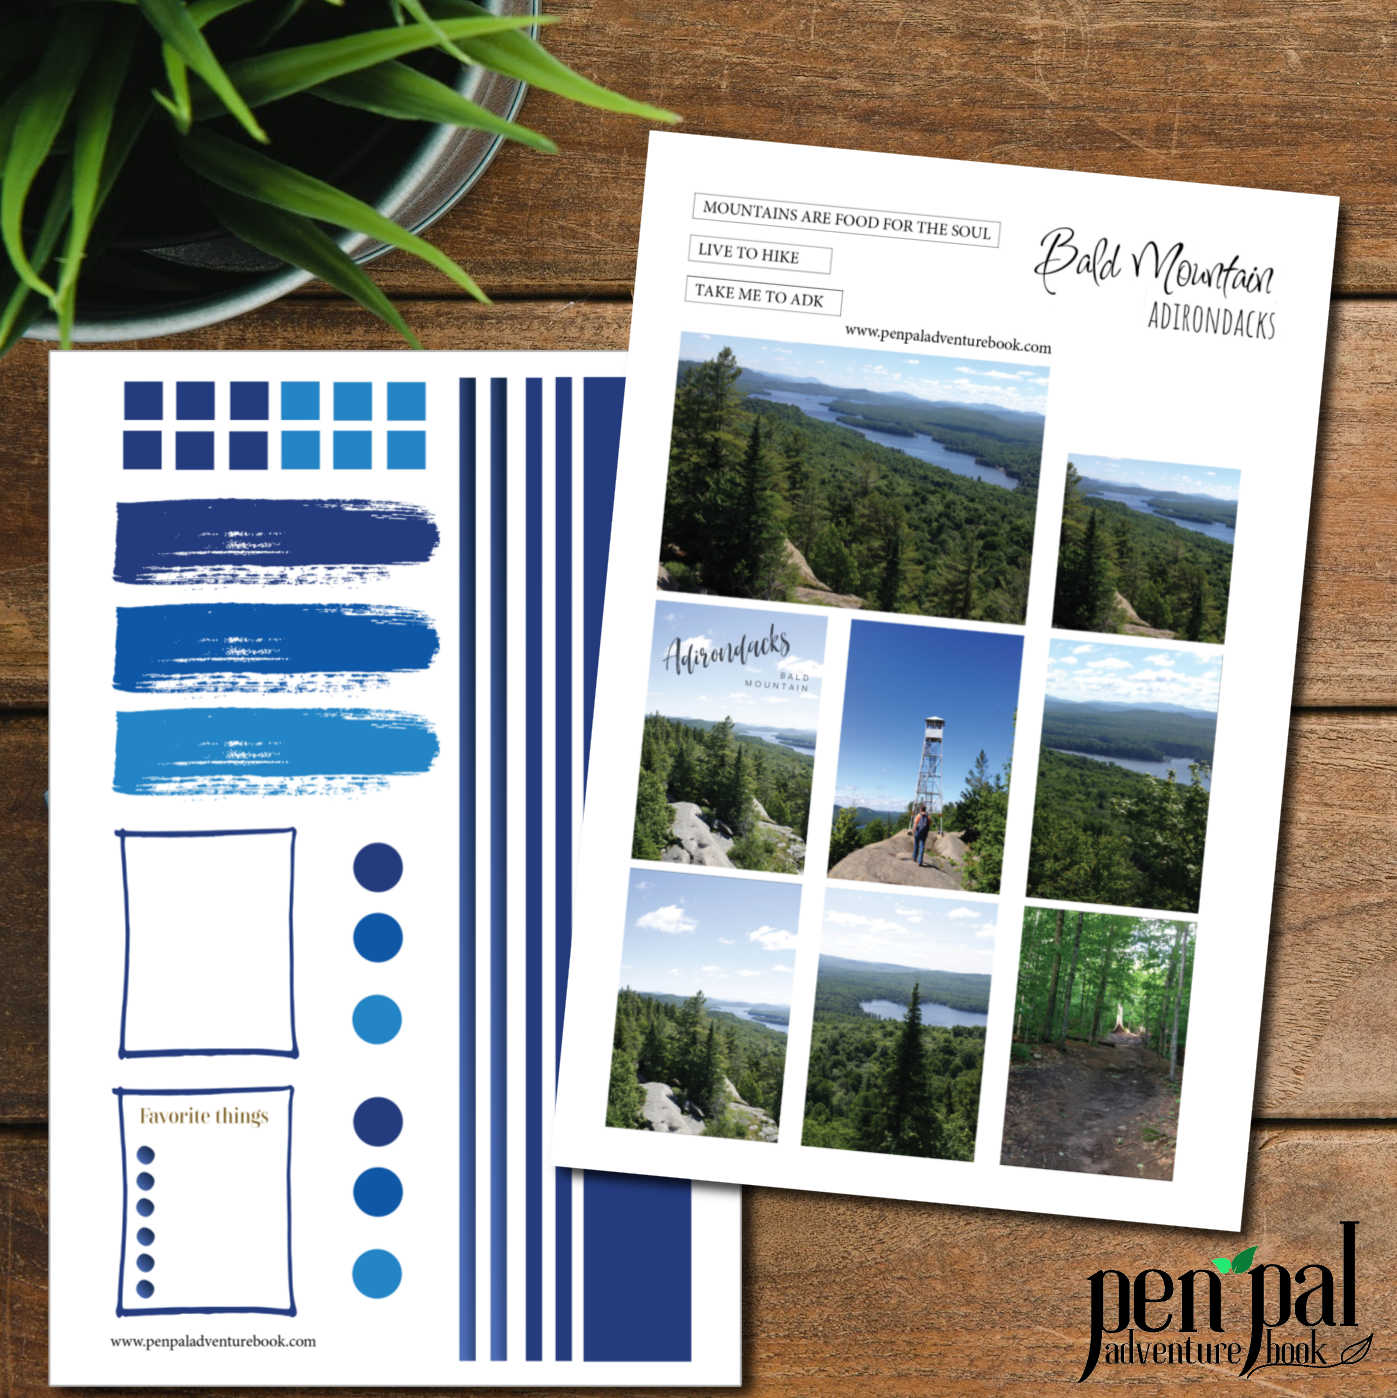 Instant Download-Bald Mountain Hike in NY Adirondacks-Pen Pal Adventure Book Coordinating Printables